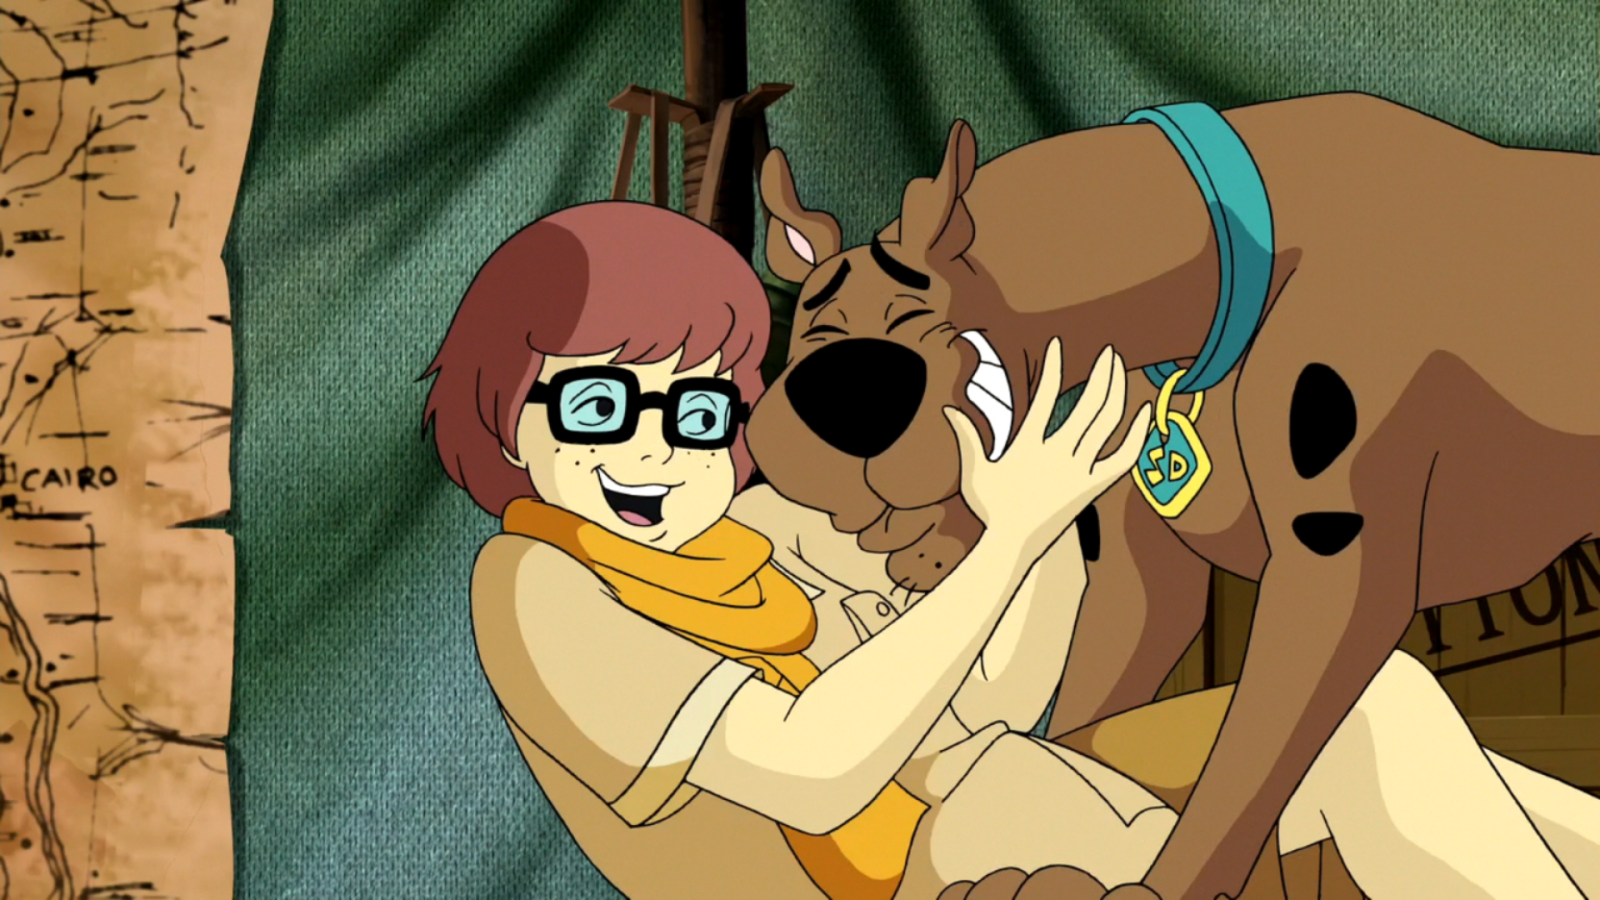 You think stories are reality?, so if I said me and scooby had a great nigh...